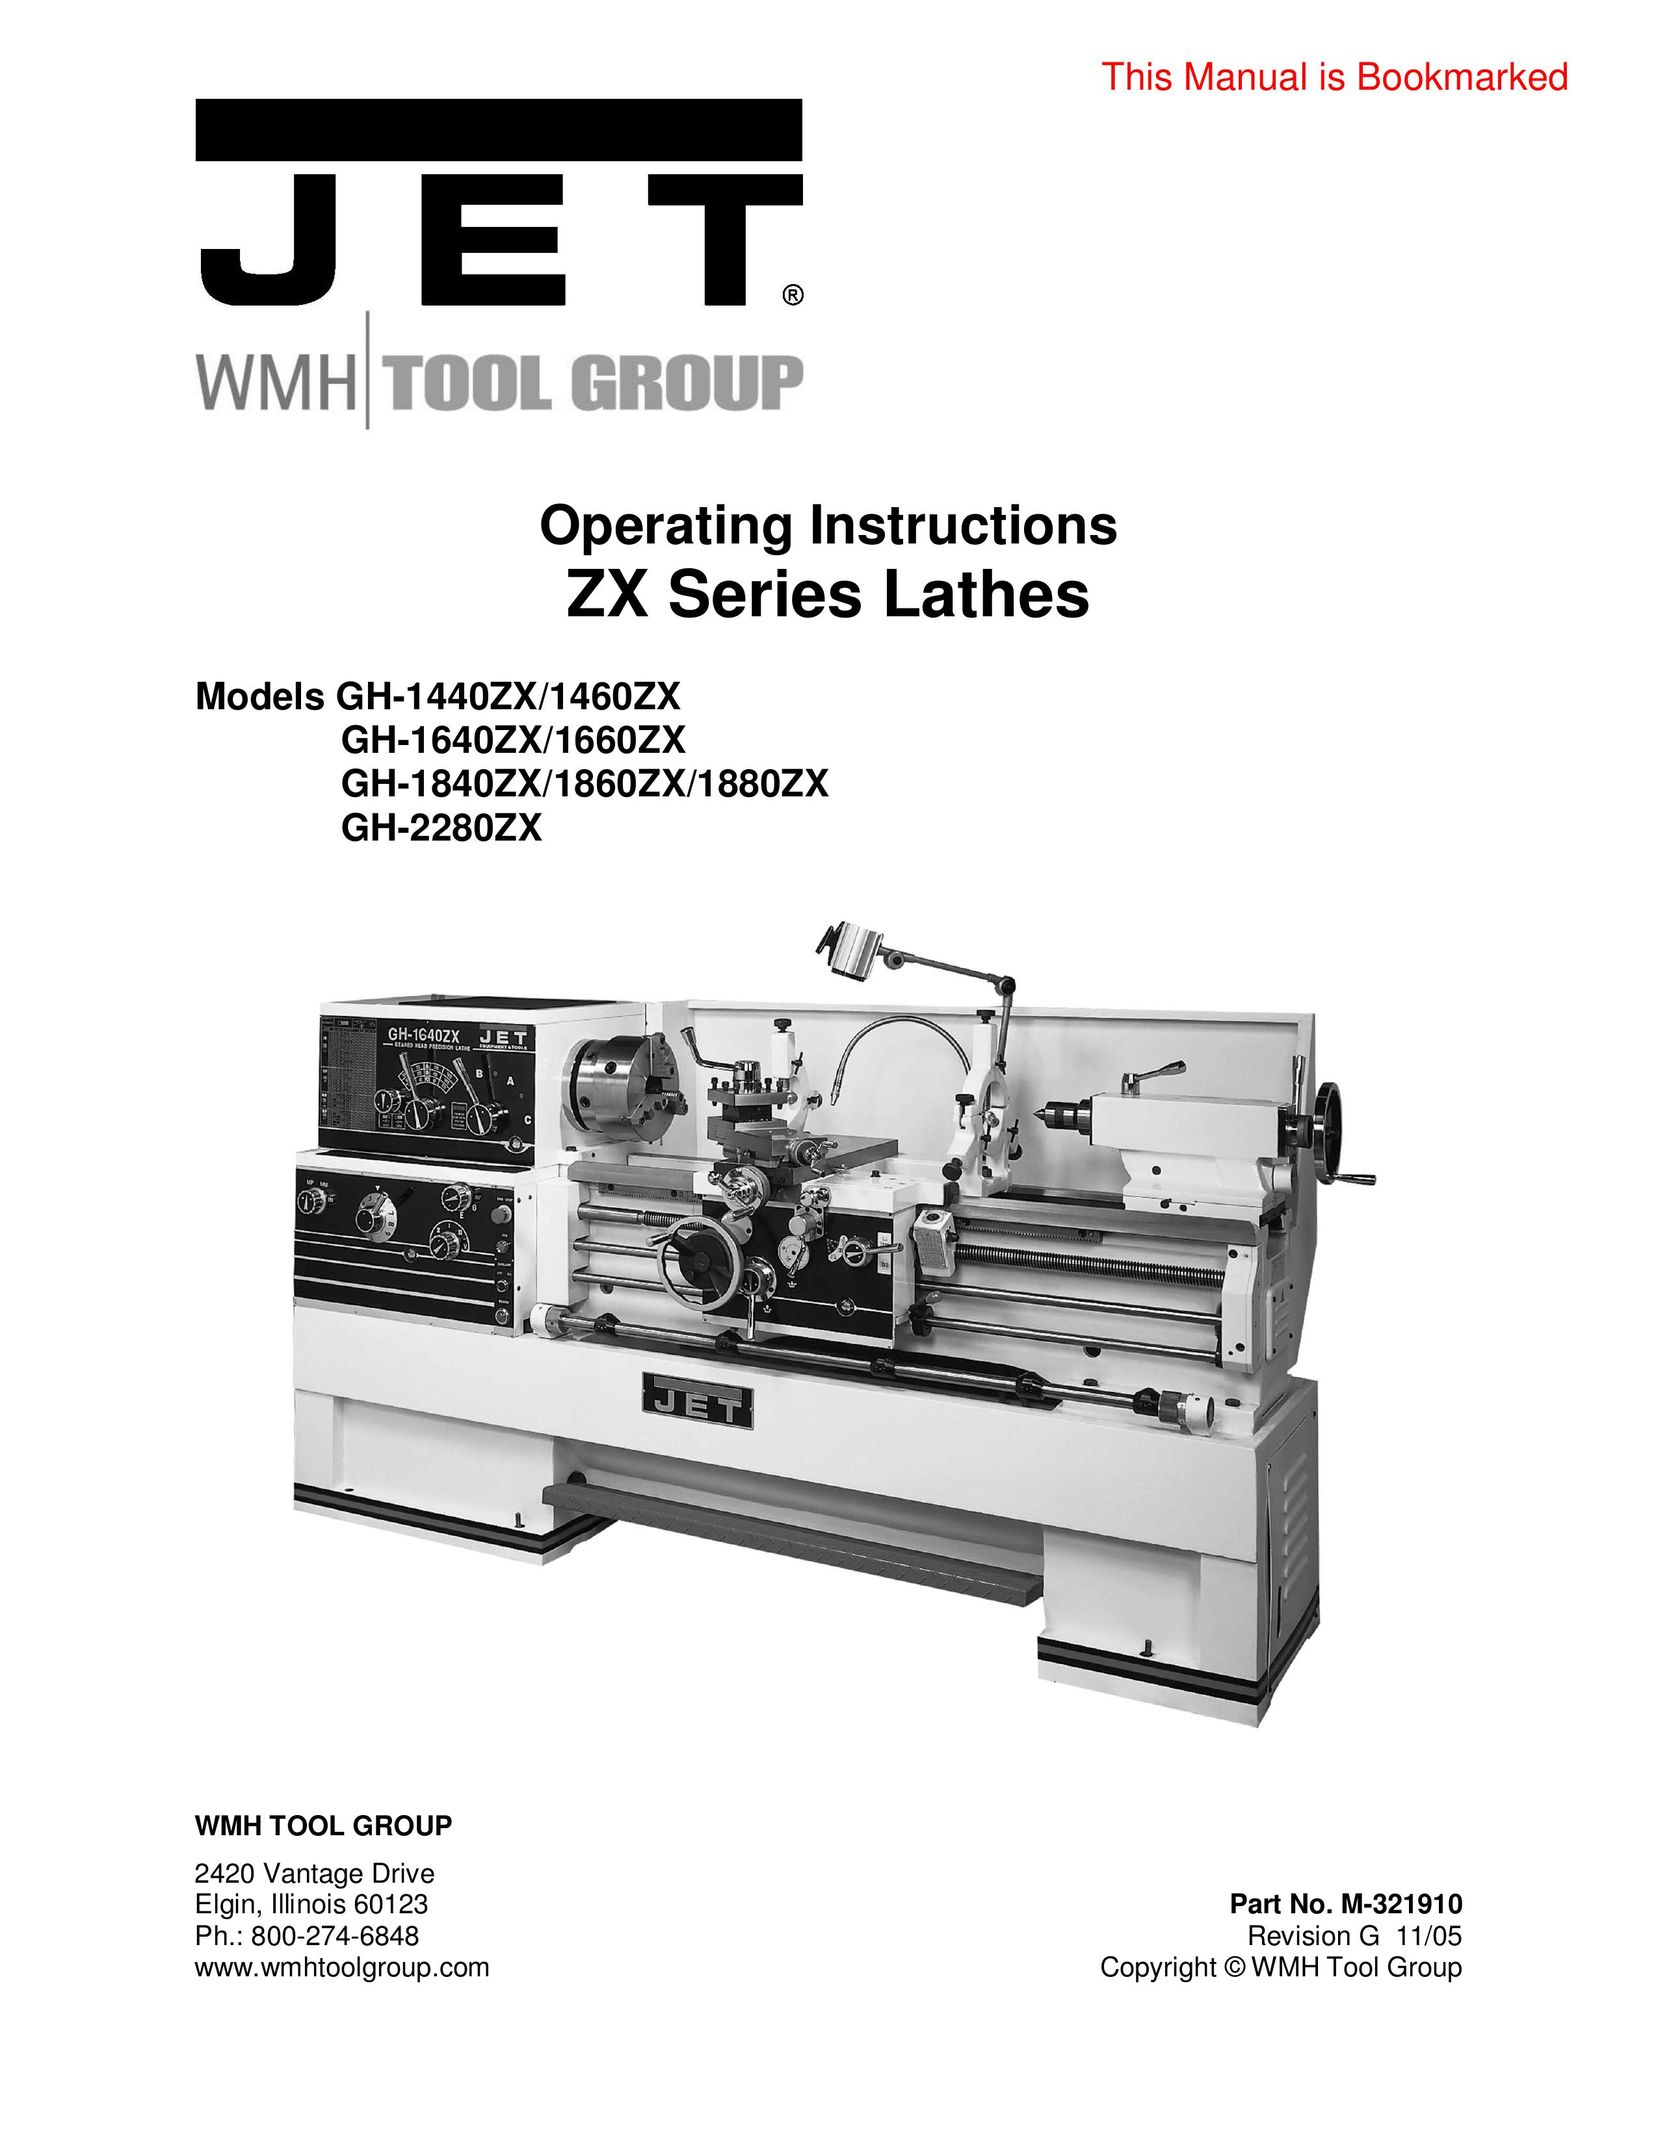 Jet Tools GH-1440ZX Lathe User Manual